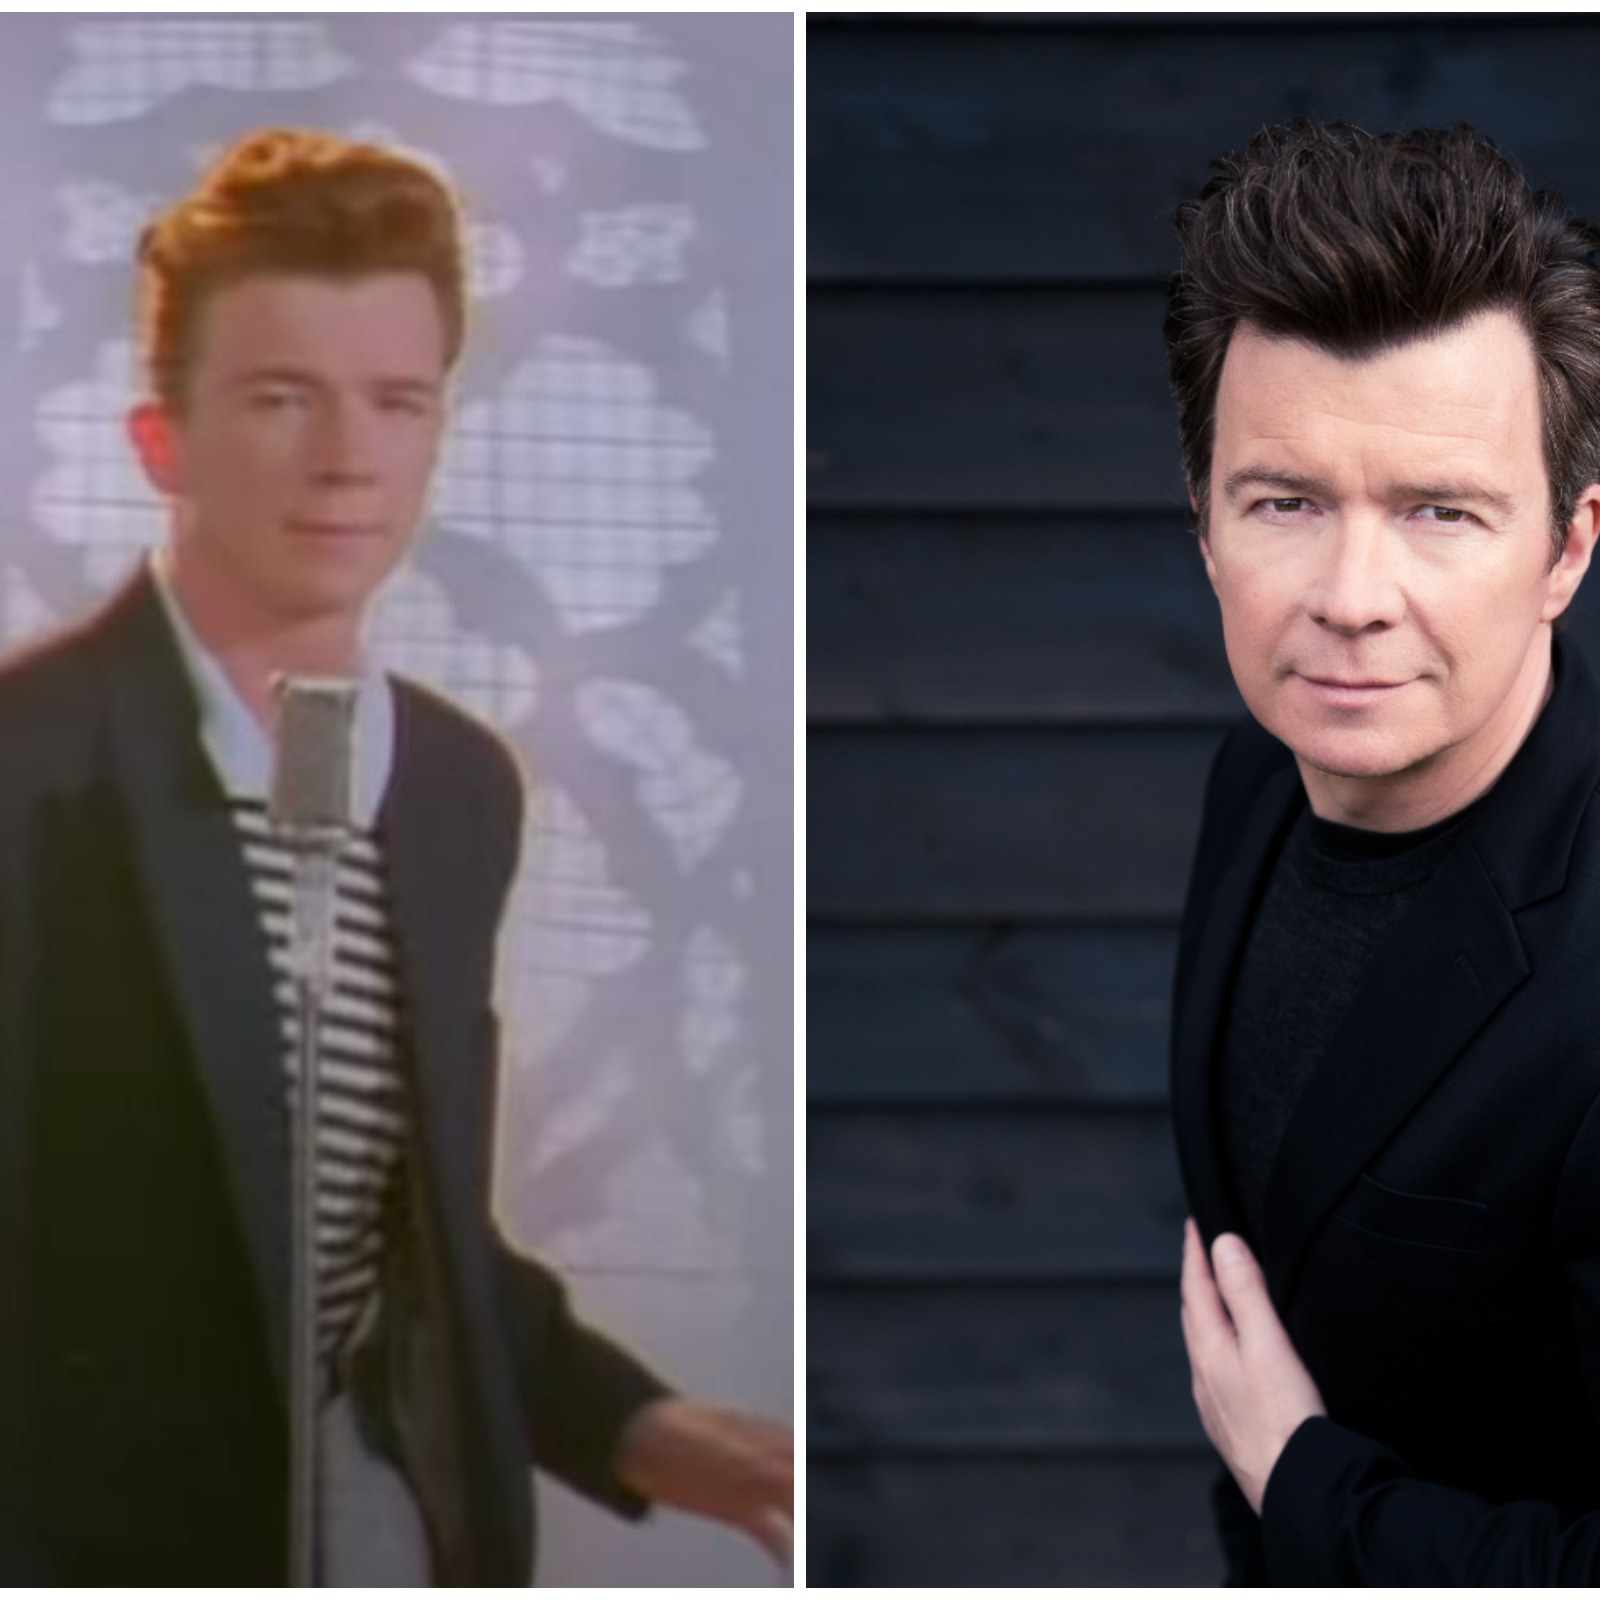 What does it mean to be rick-rolled?